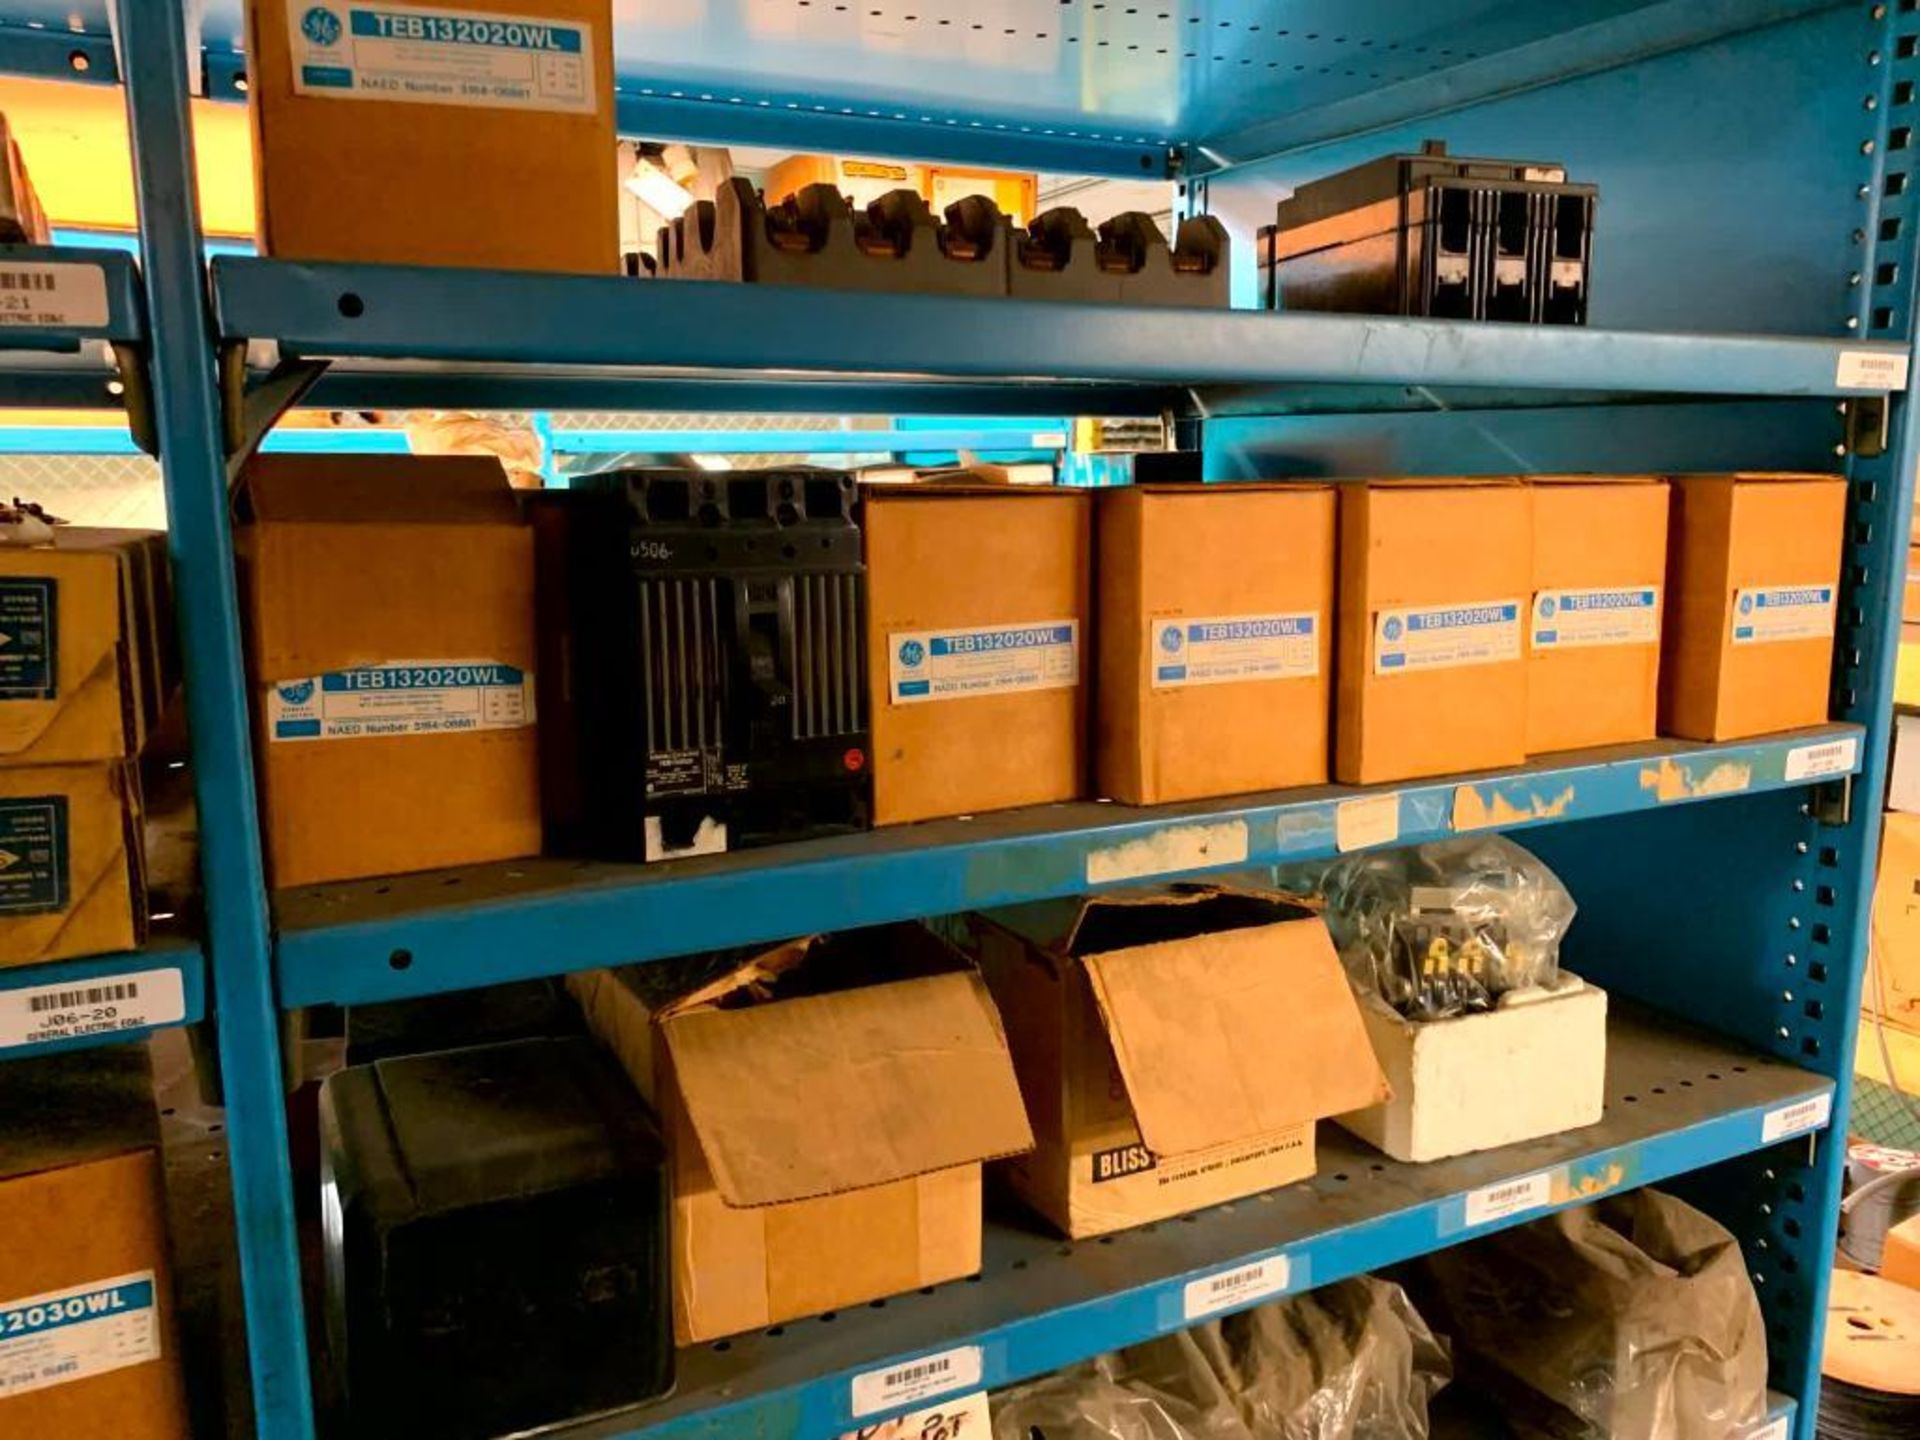 Content on (22) Bays of Clip Shelving: Transformers, Safety Switches, Magnetic Starters, Enclosures, - Image 40 of 74